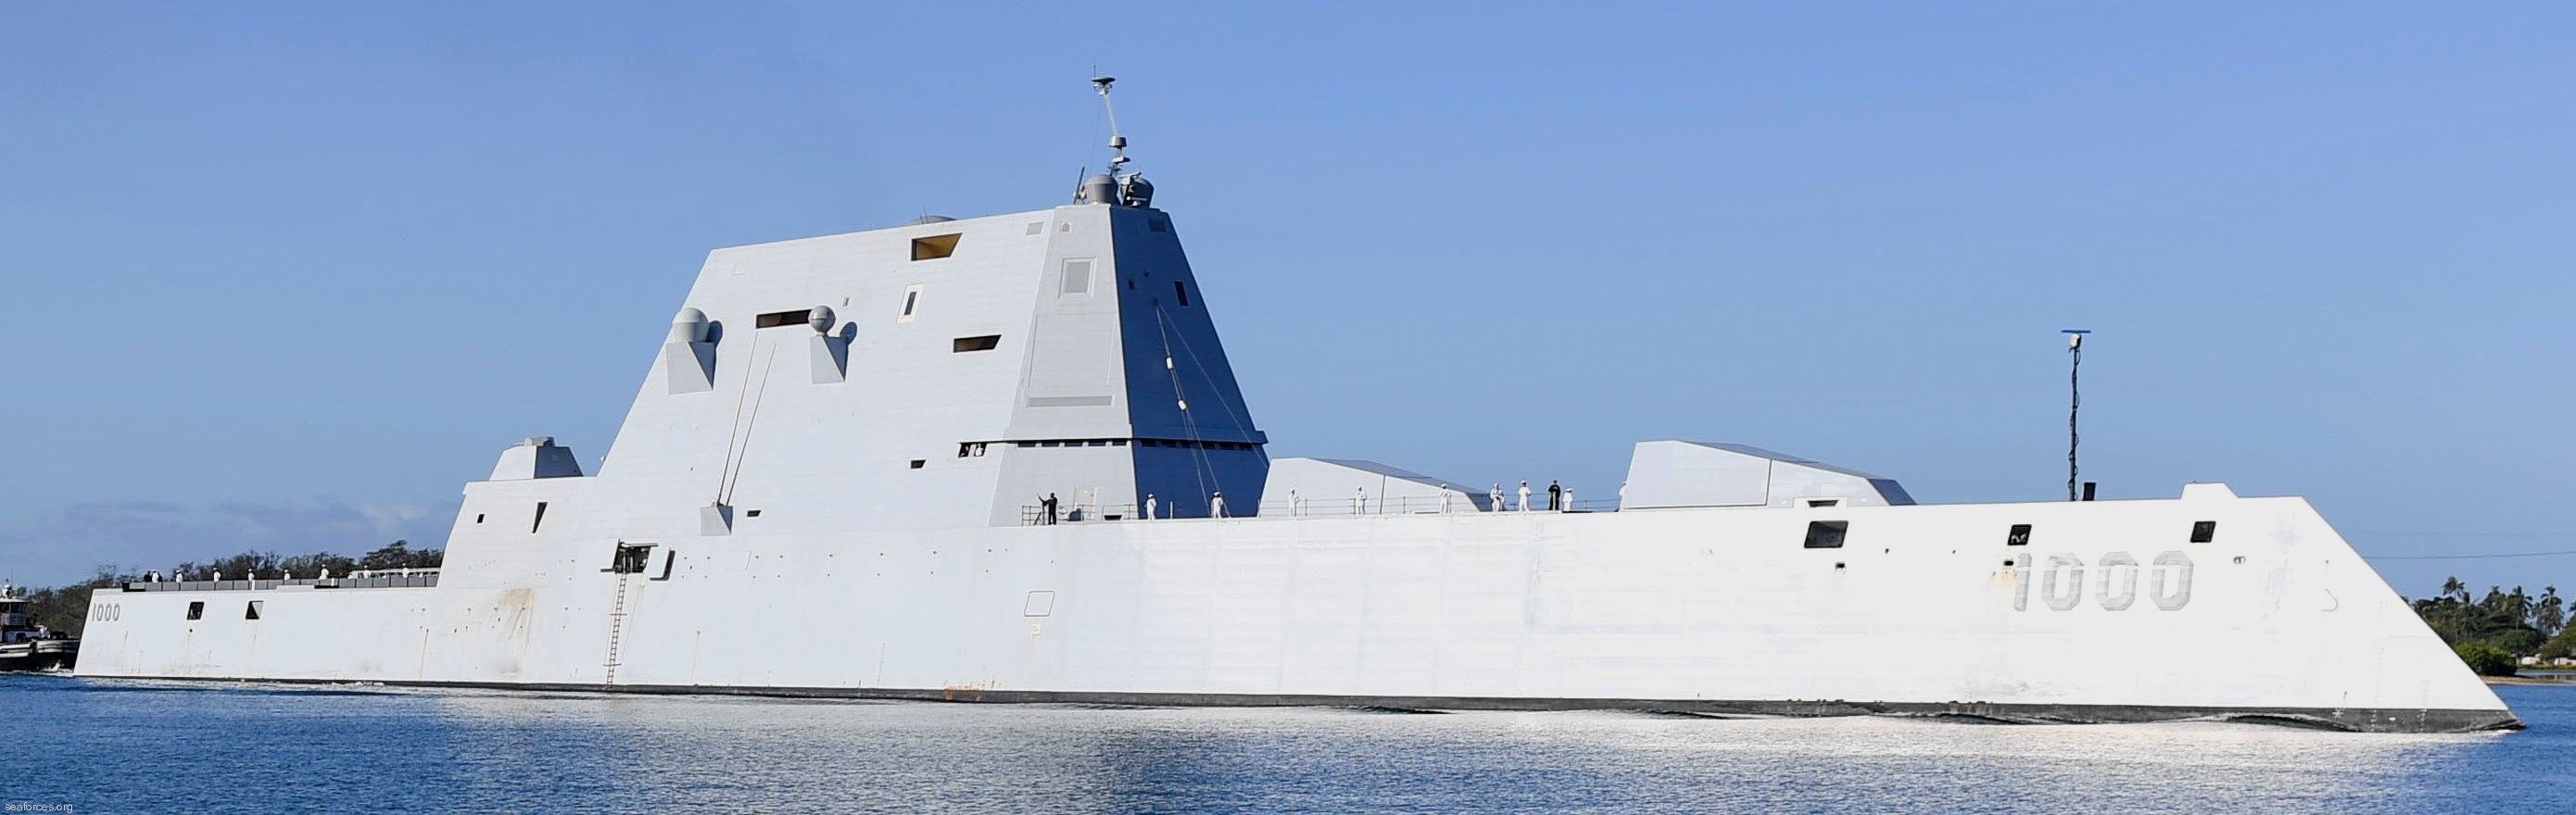 ddg-1000 uss zumwalt guided missile destroyer us navy 78 joint base pearl harbor hickam hawaii